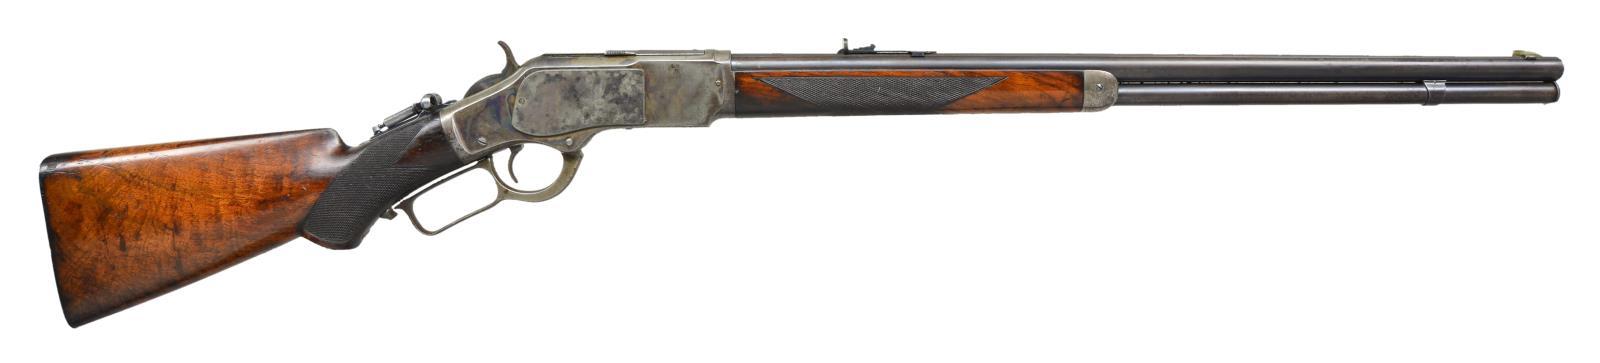 WINCHESTER 1873 DELUXE LEVER-ACTION RIFLE.